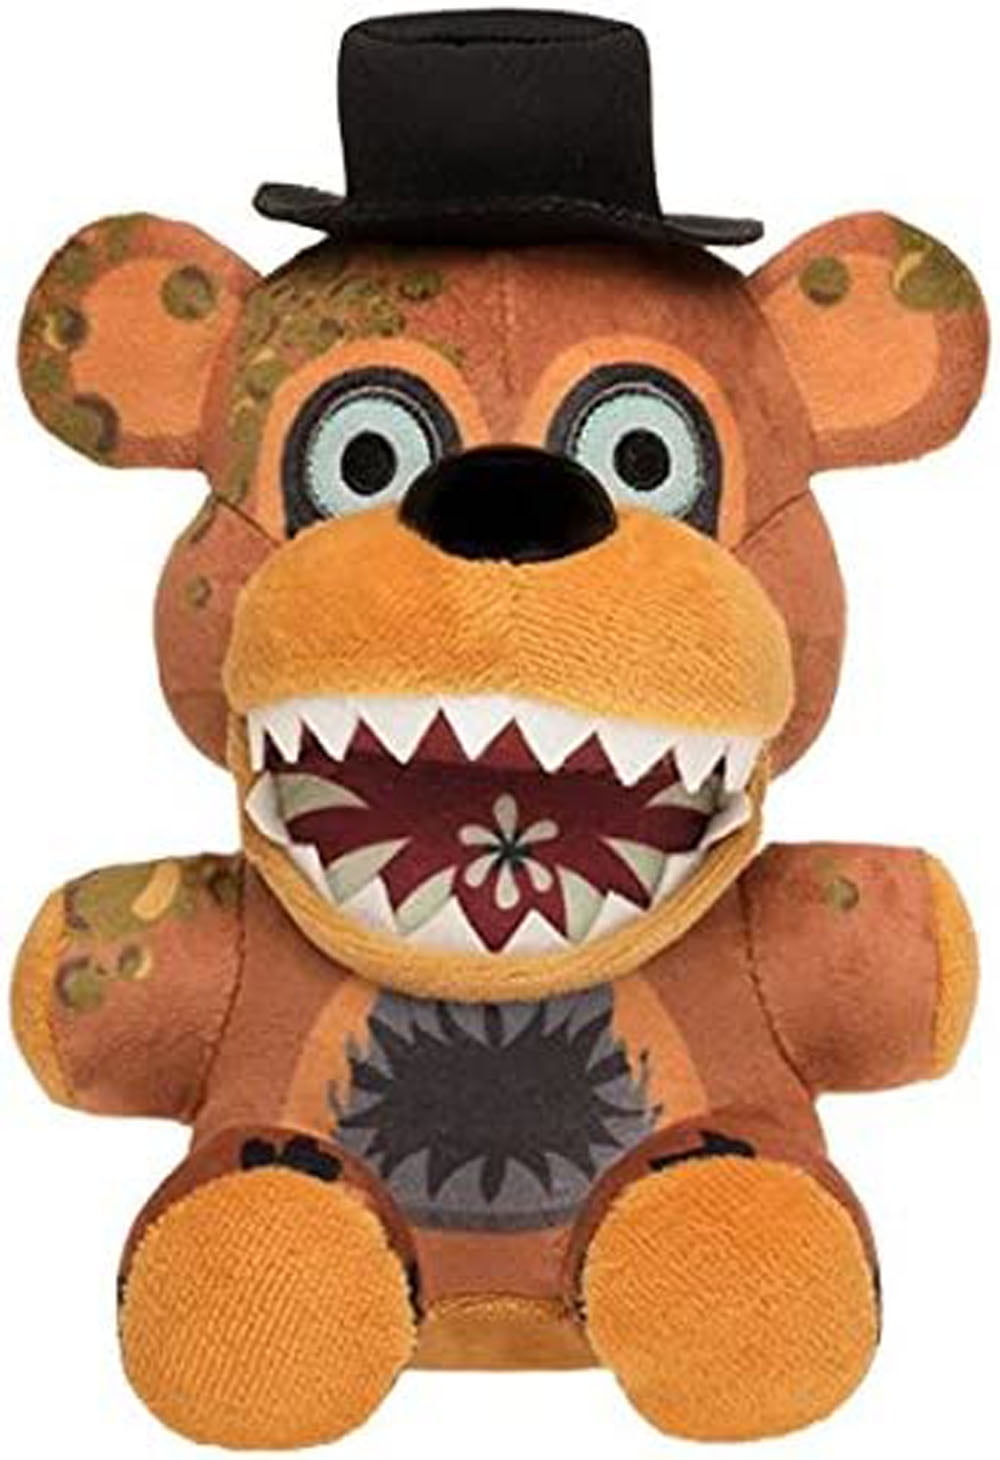  Twisted Freddy Plush Toy, FNAF plushies Toy, FNAF All Character Stuffed  Animal Doll Children's Gift Collection,8” : Toys & Games